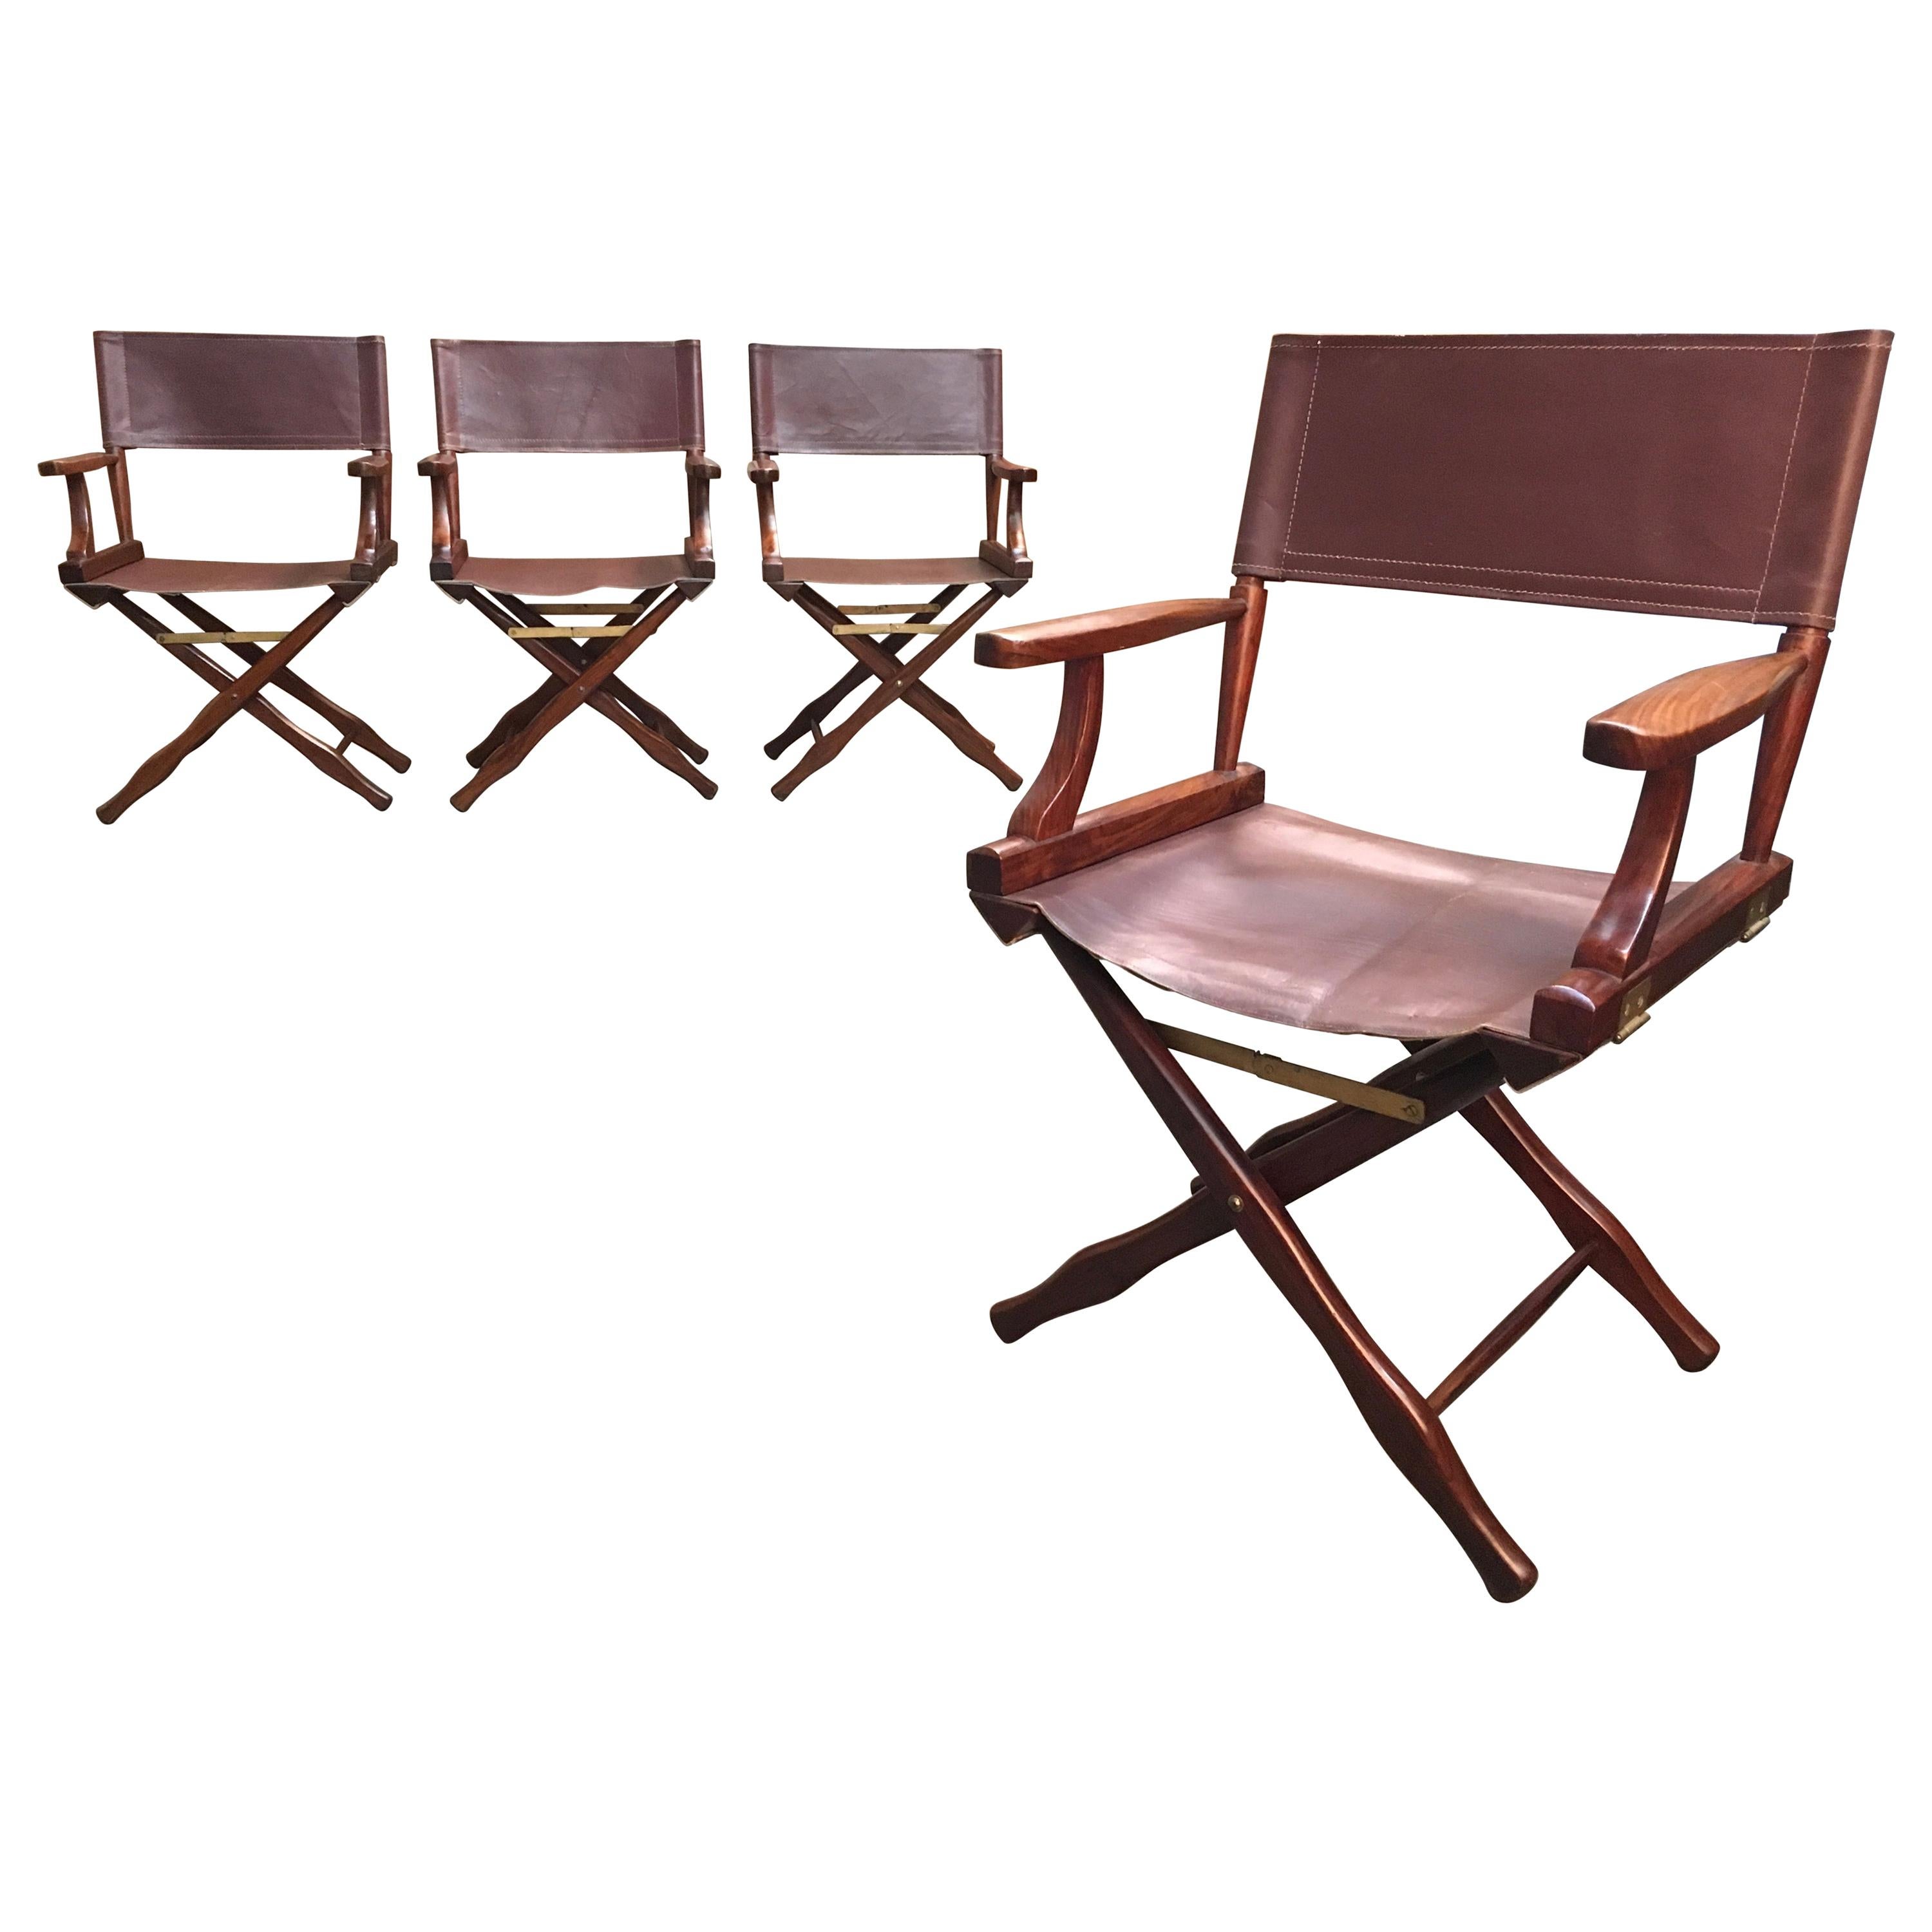 Leather Director Chairs by M. Hayat & Bros Ltd.